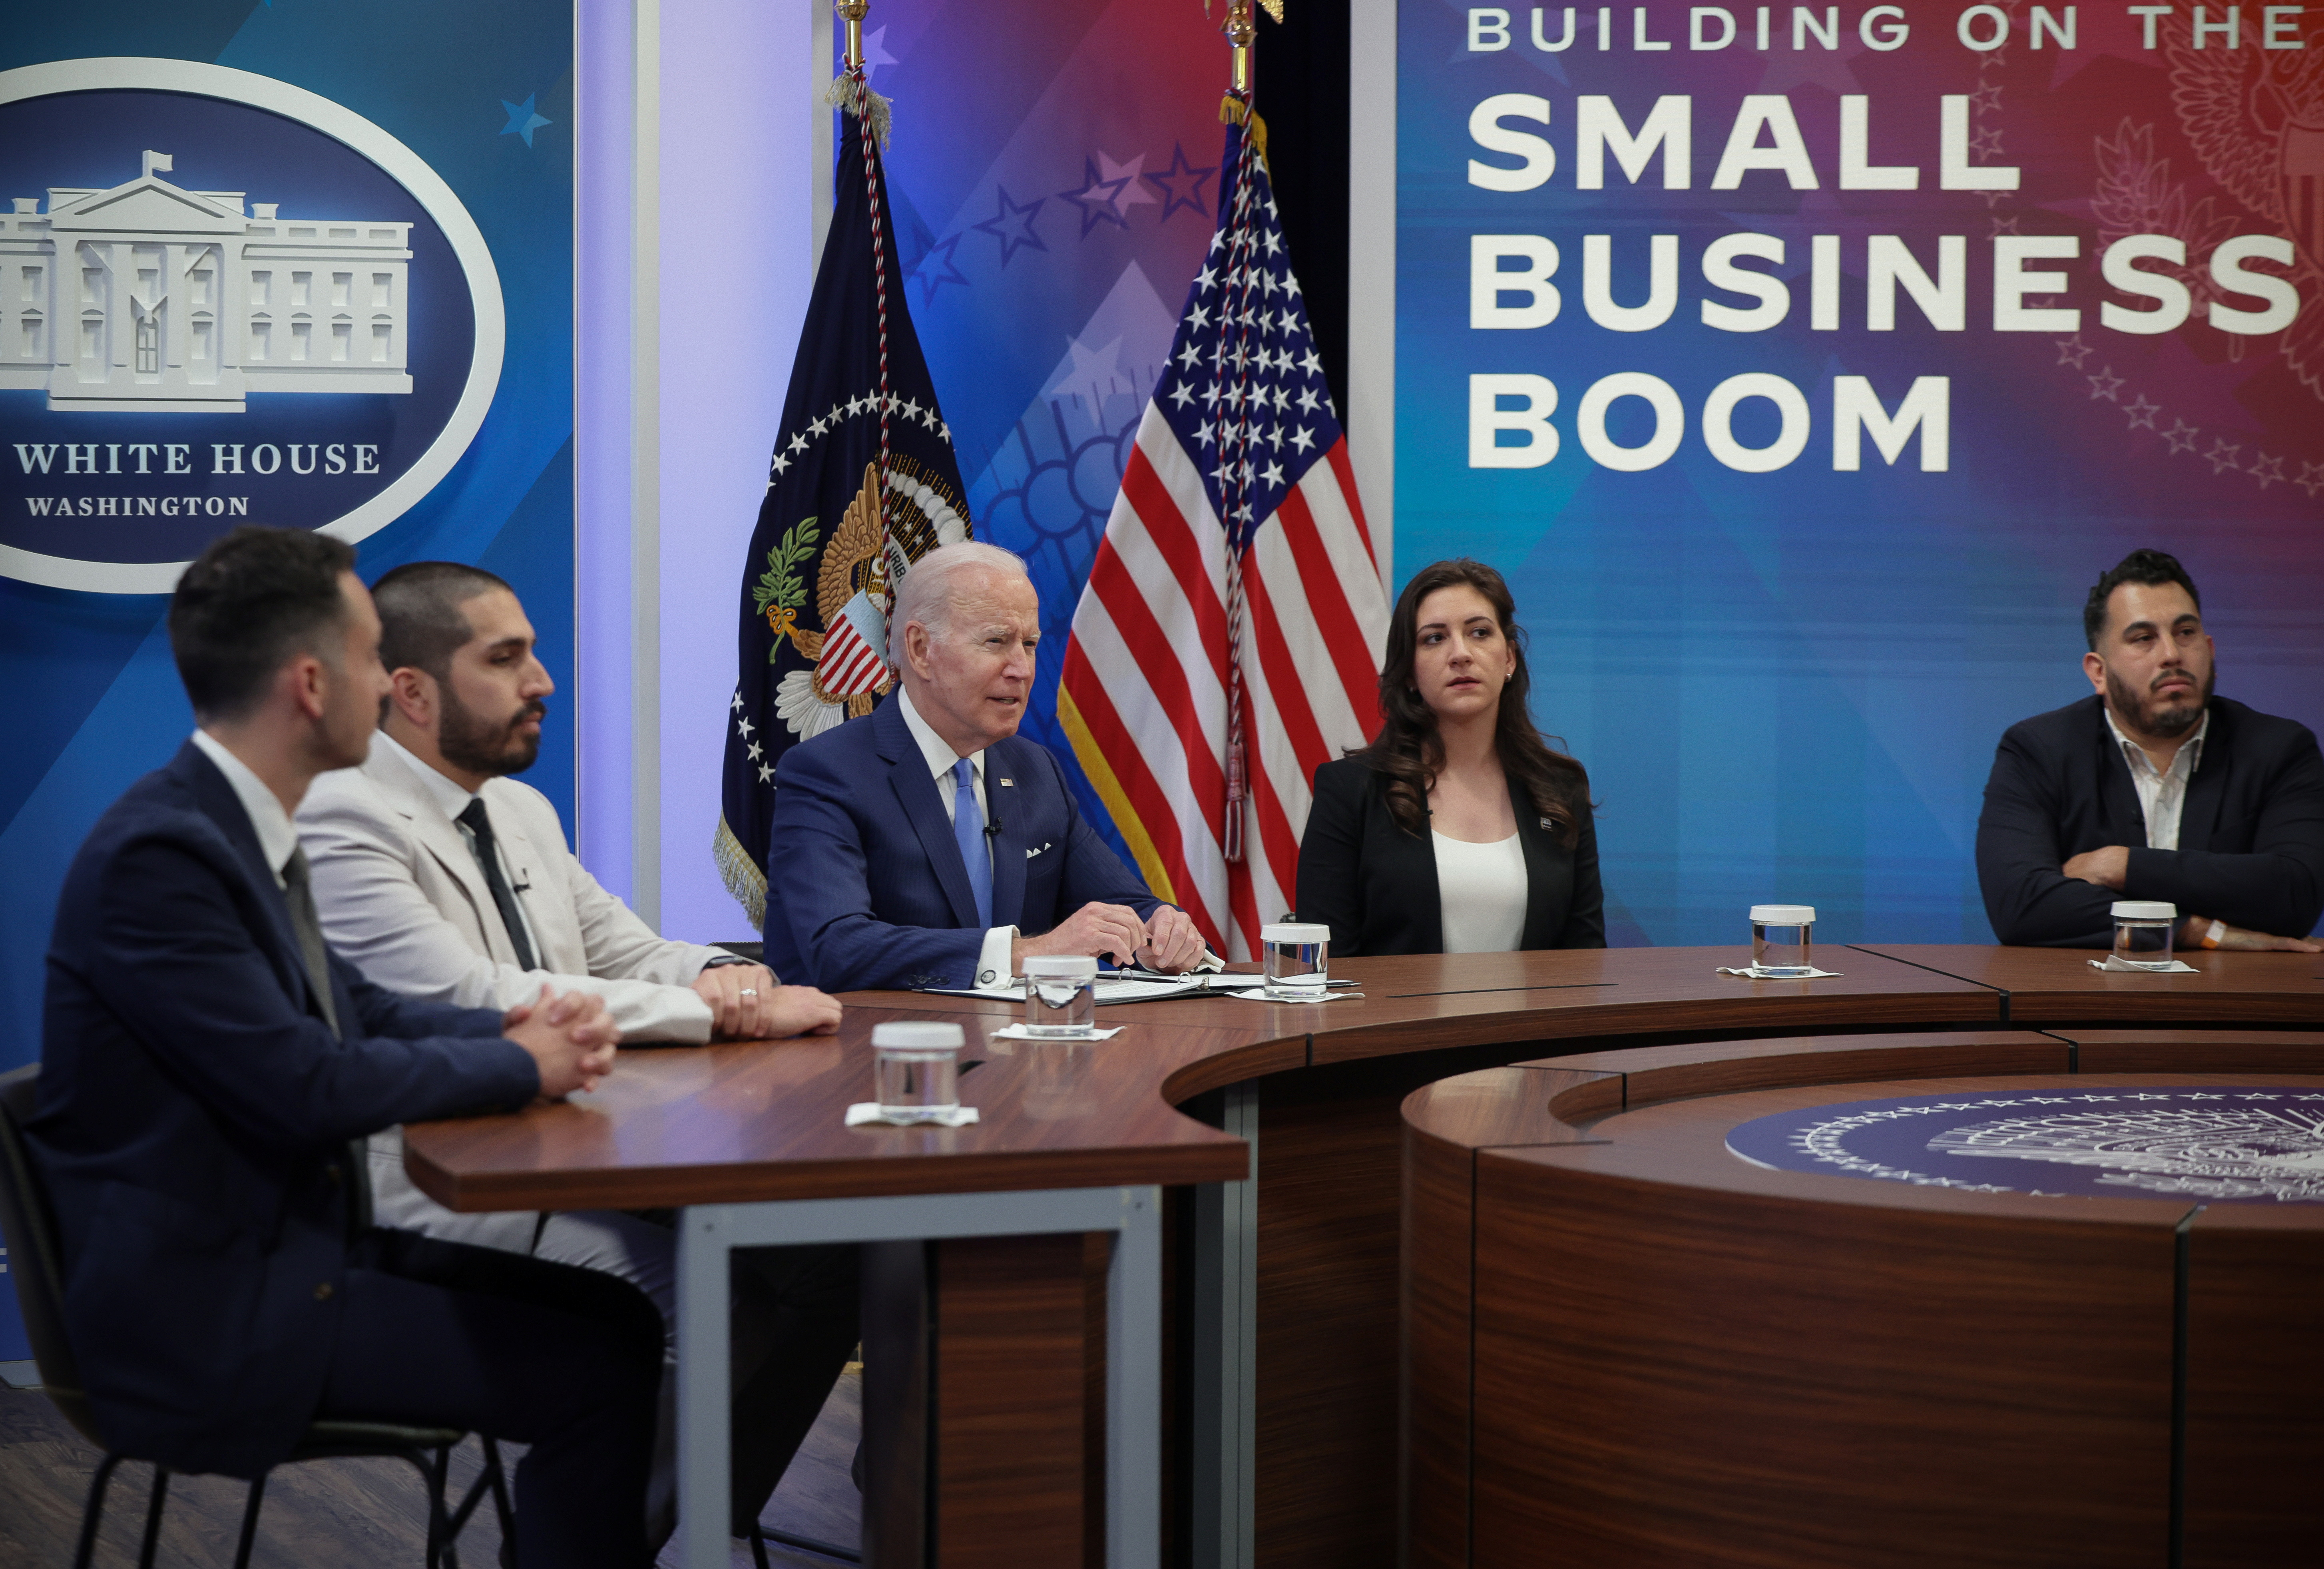 U.S. President Joe Biden meets with small business owners at the White House in Washington